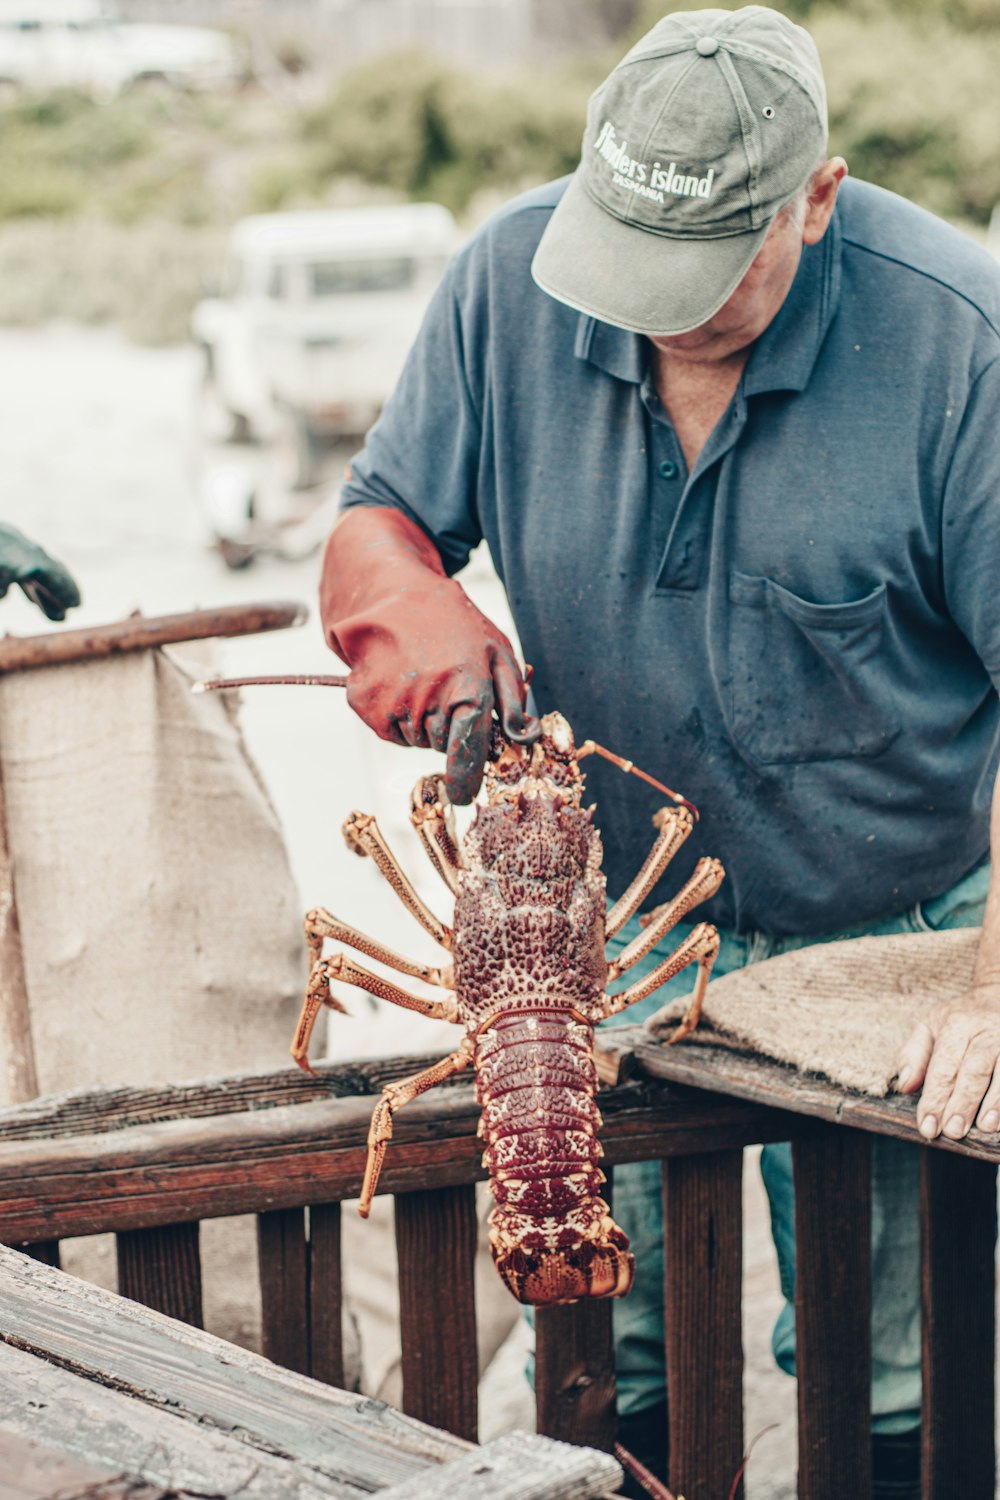 a man holding a large lobster on top of a wooden table